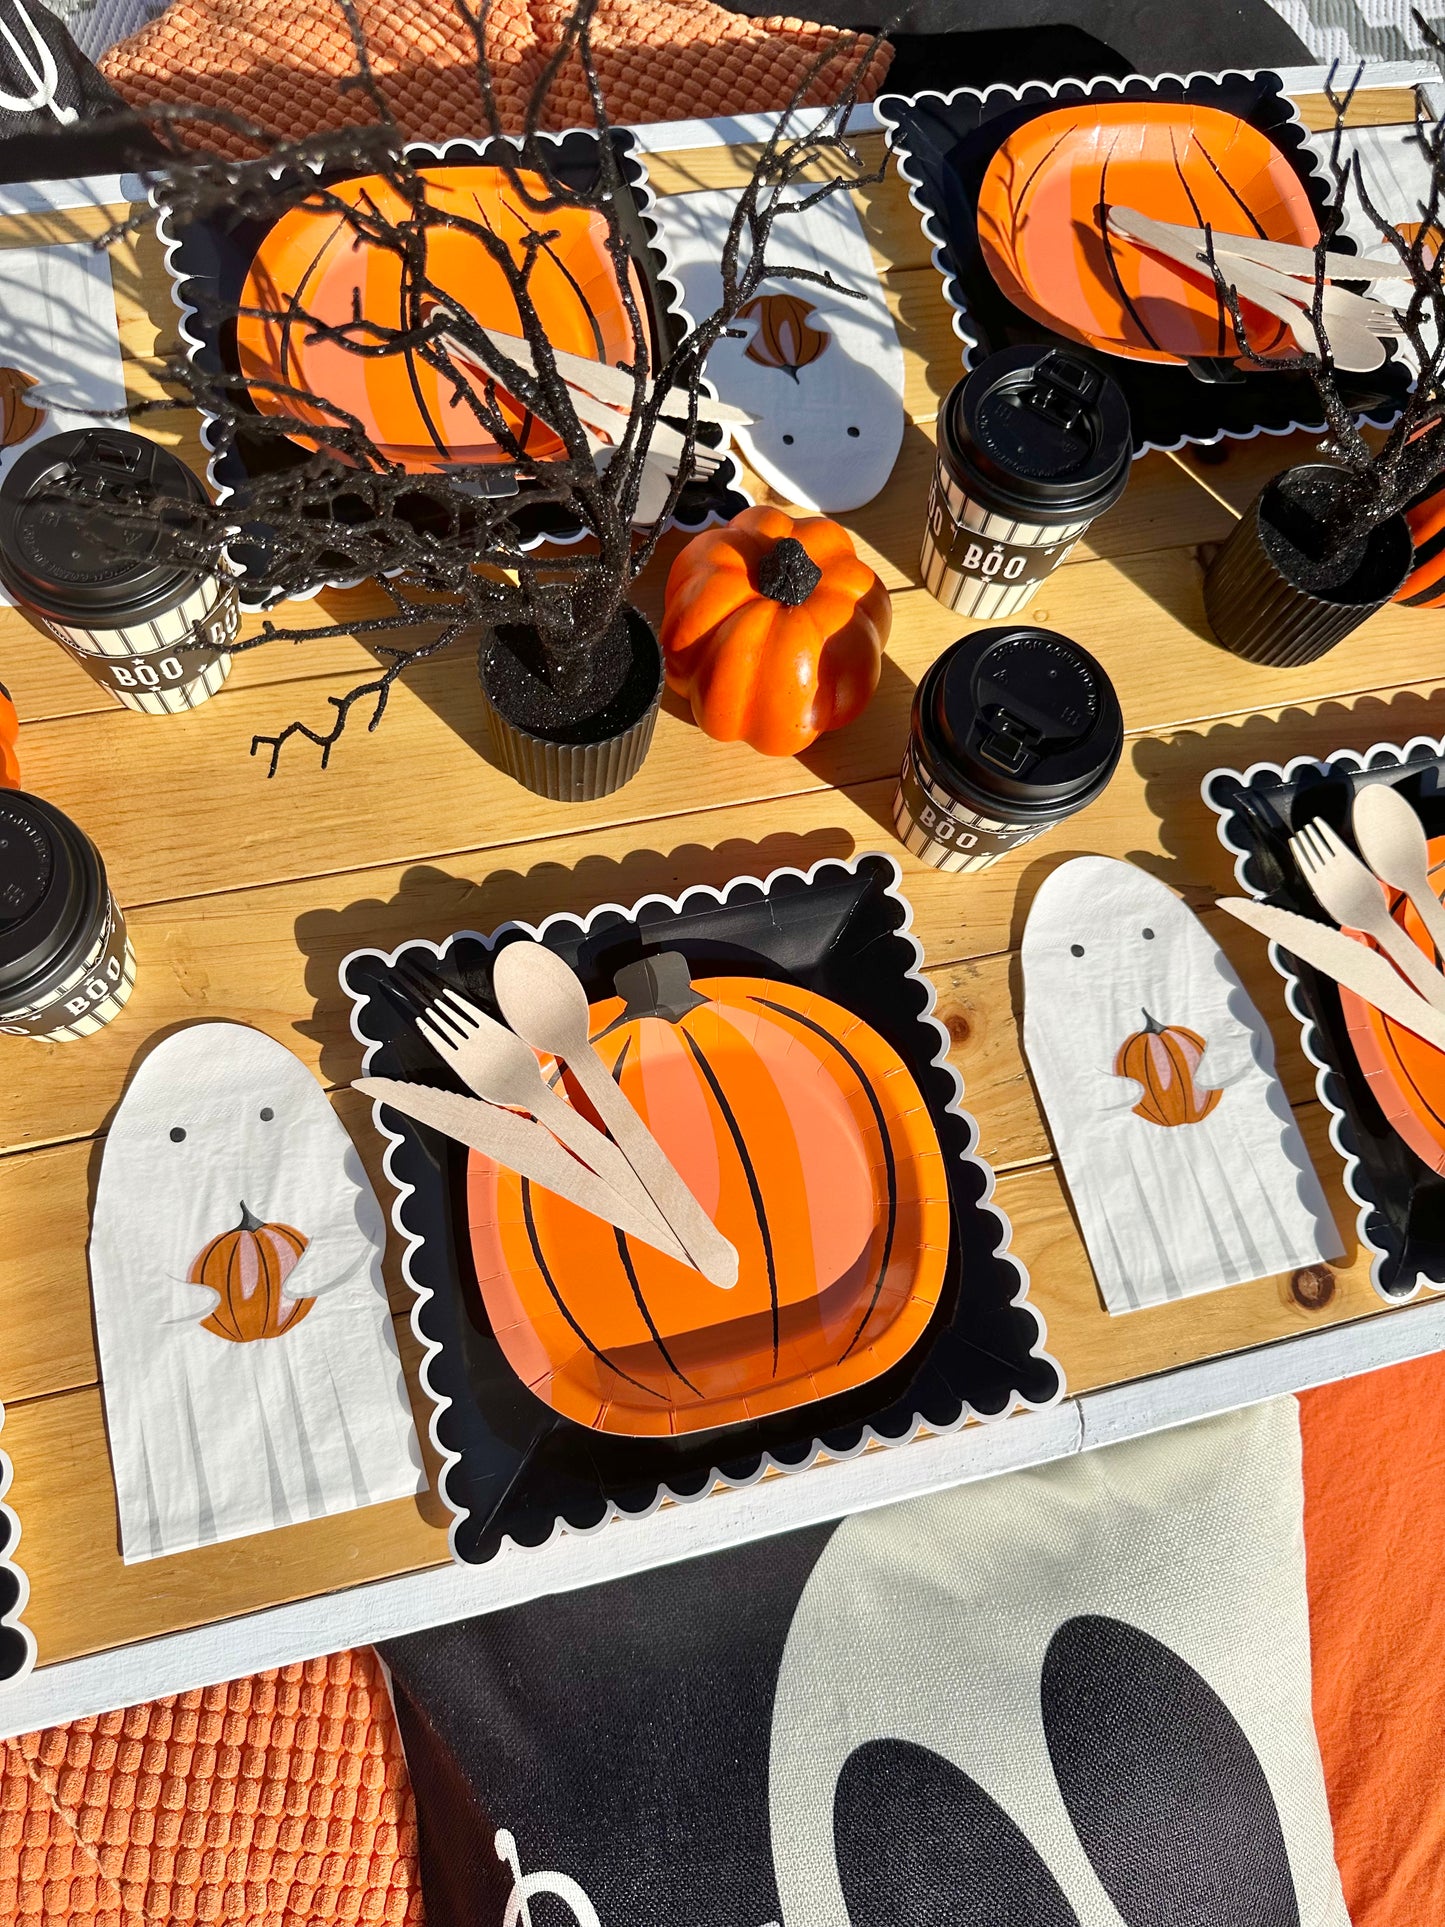 Picnic in a box, Halloween Party Supplies, Boo Party Theme